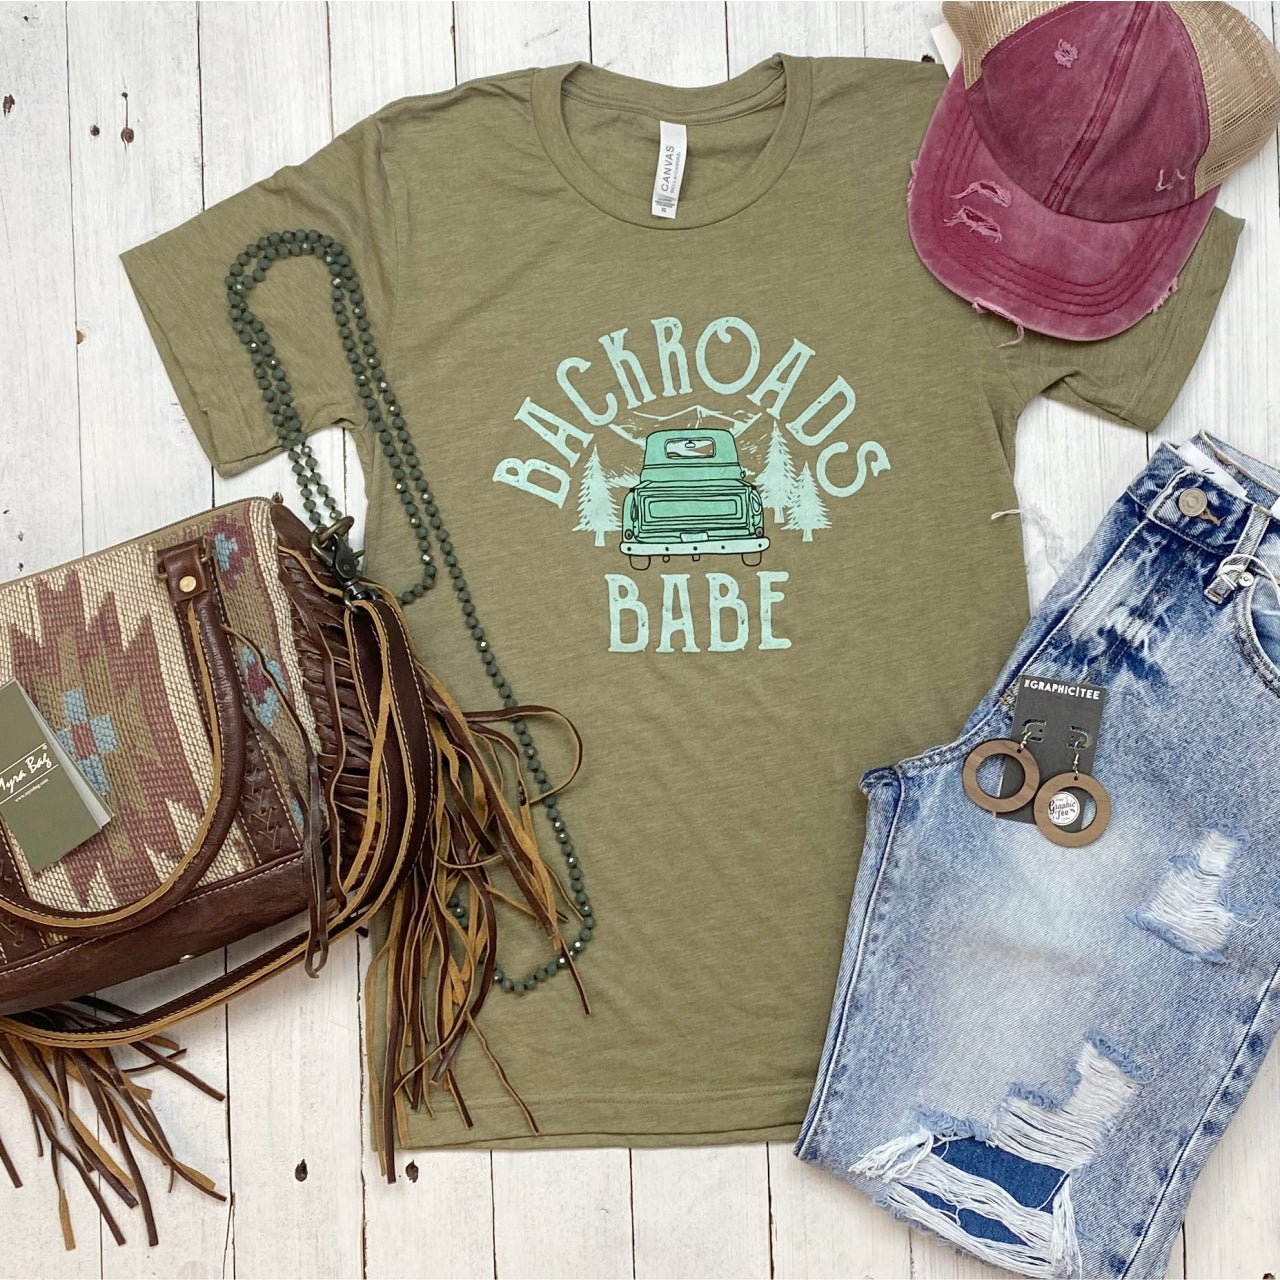 Backroads Babe Tee - The Graphic Tee